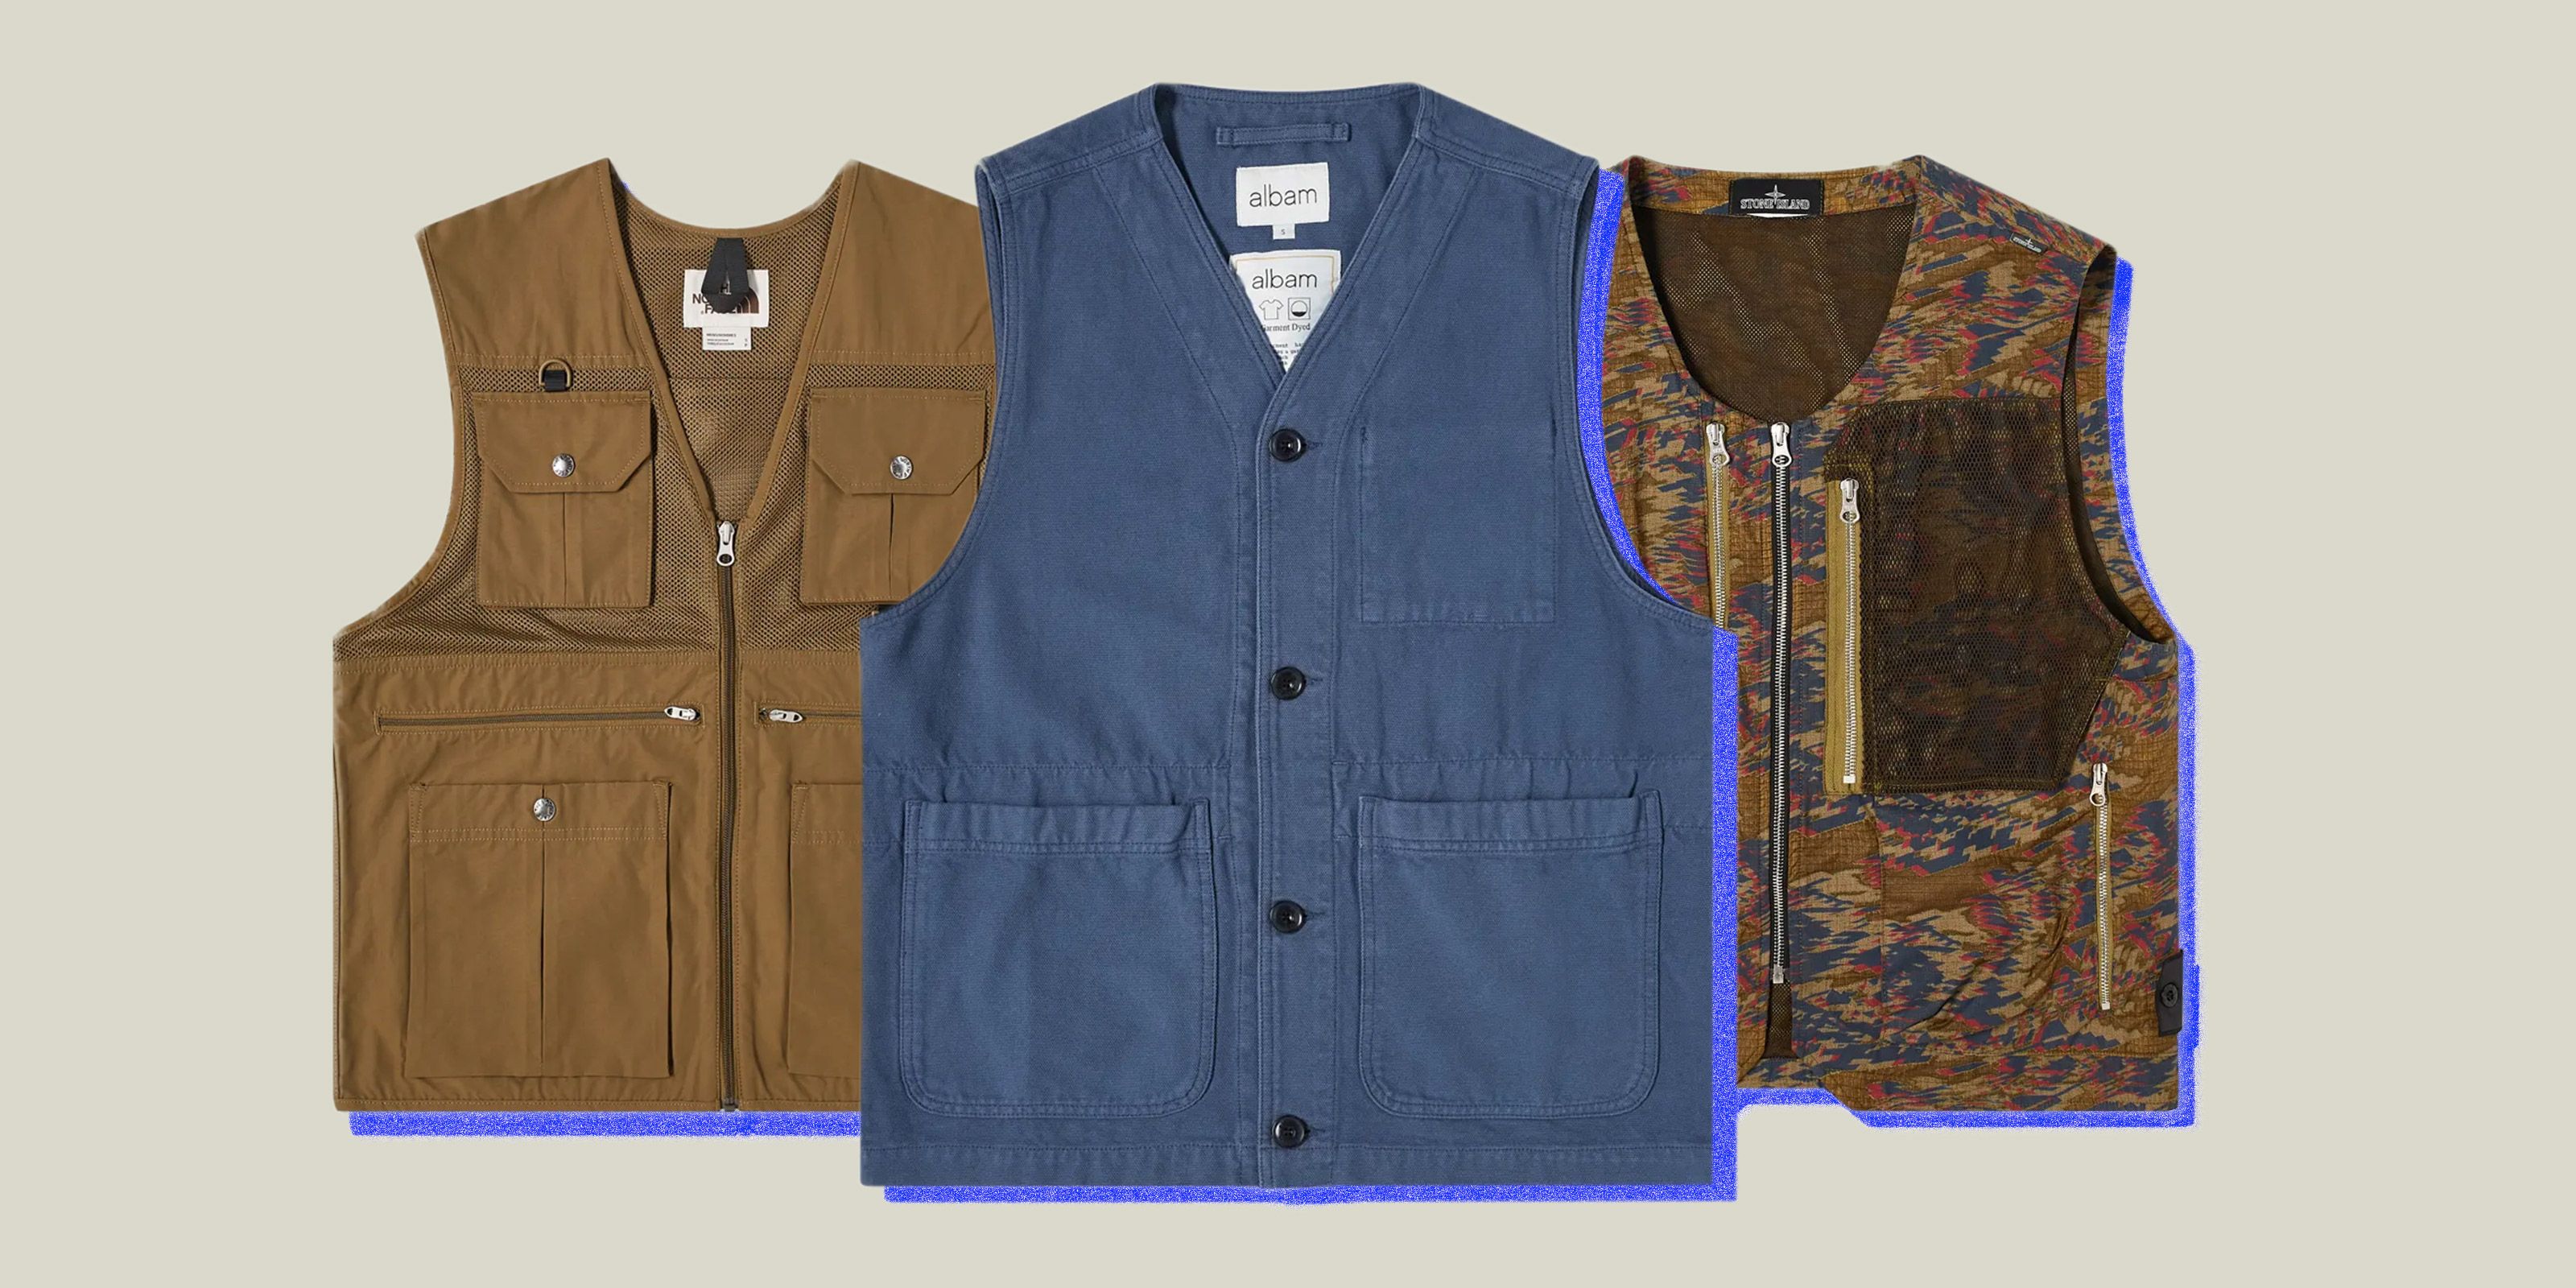 Pick Up One of These Vests for the Extra Pockets Alone